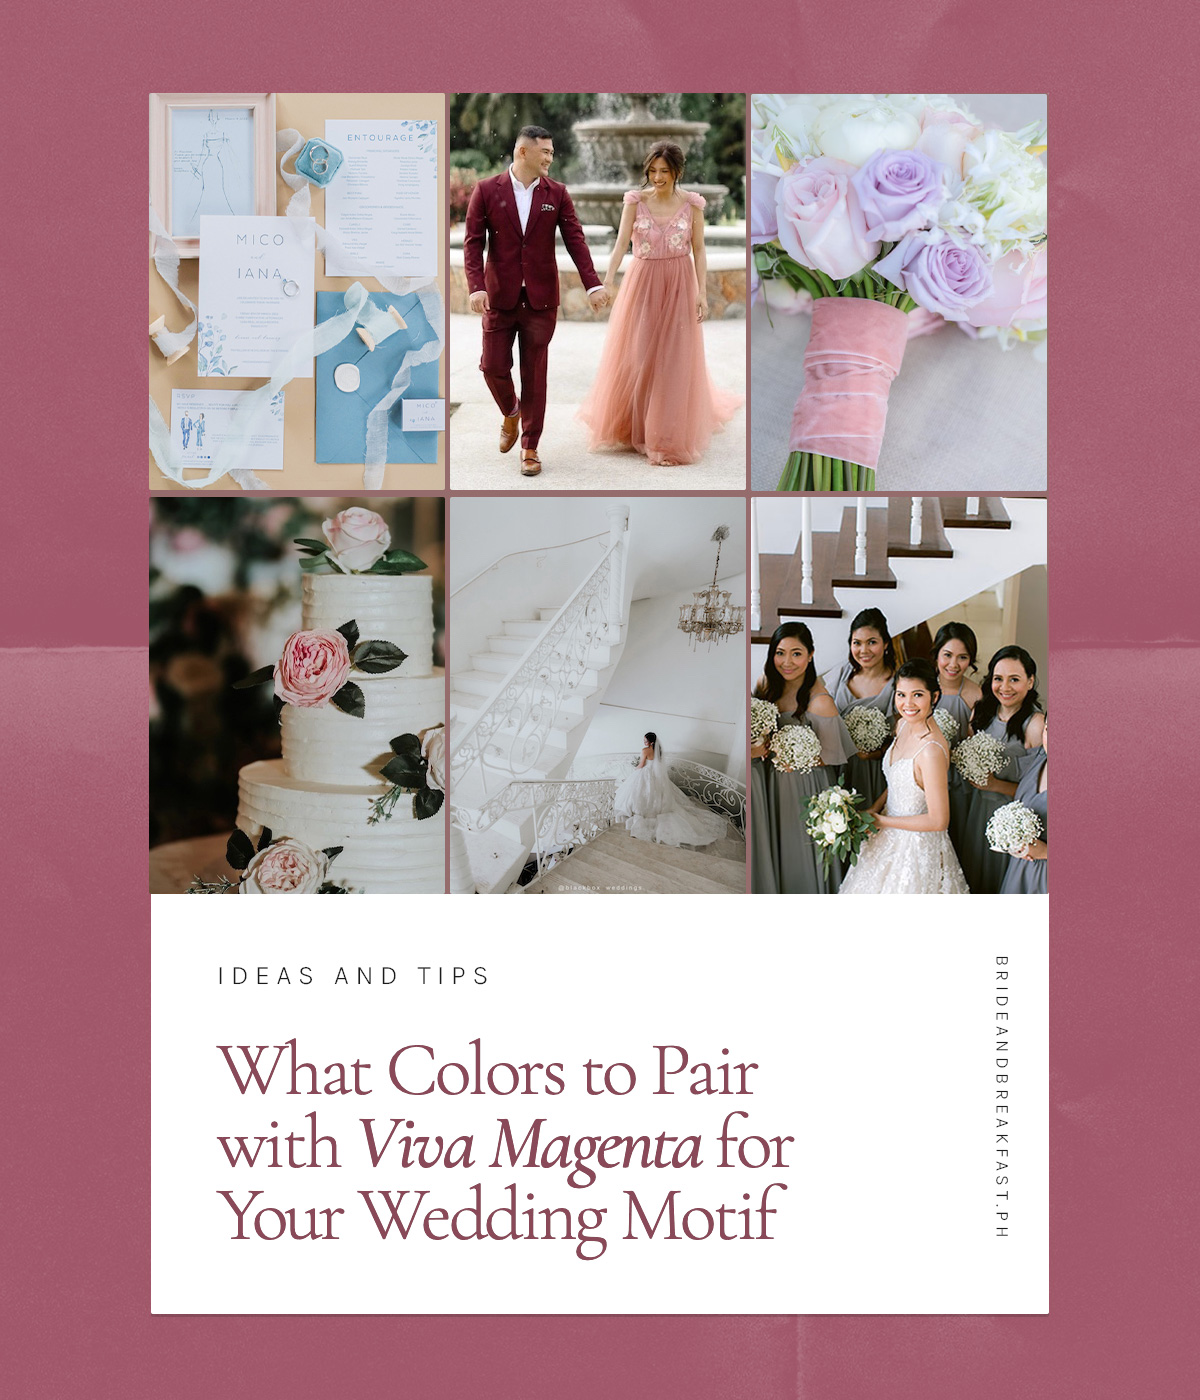 What Colors to Pair with Viva Magenta for Your Wedding Motif